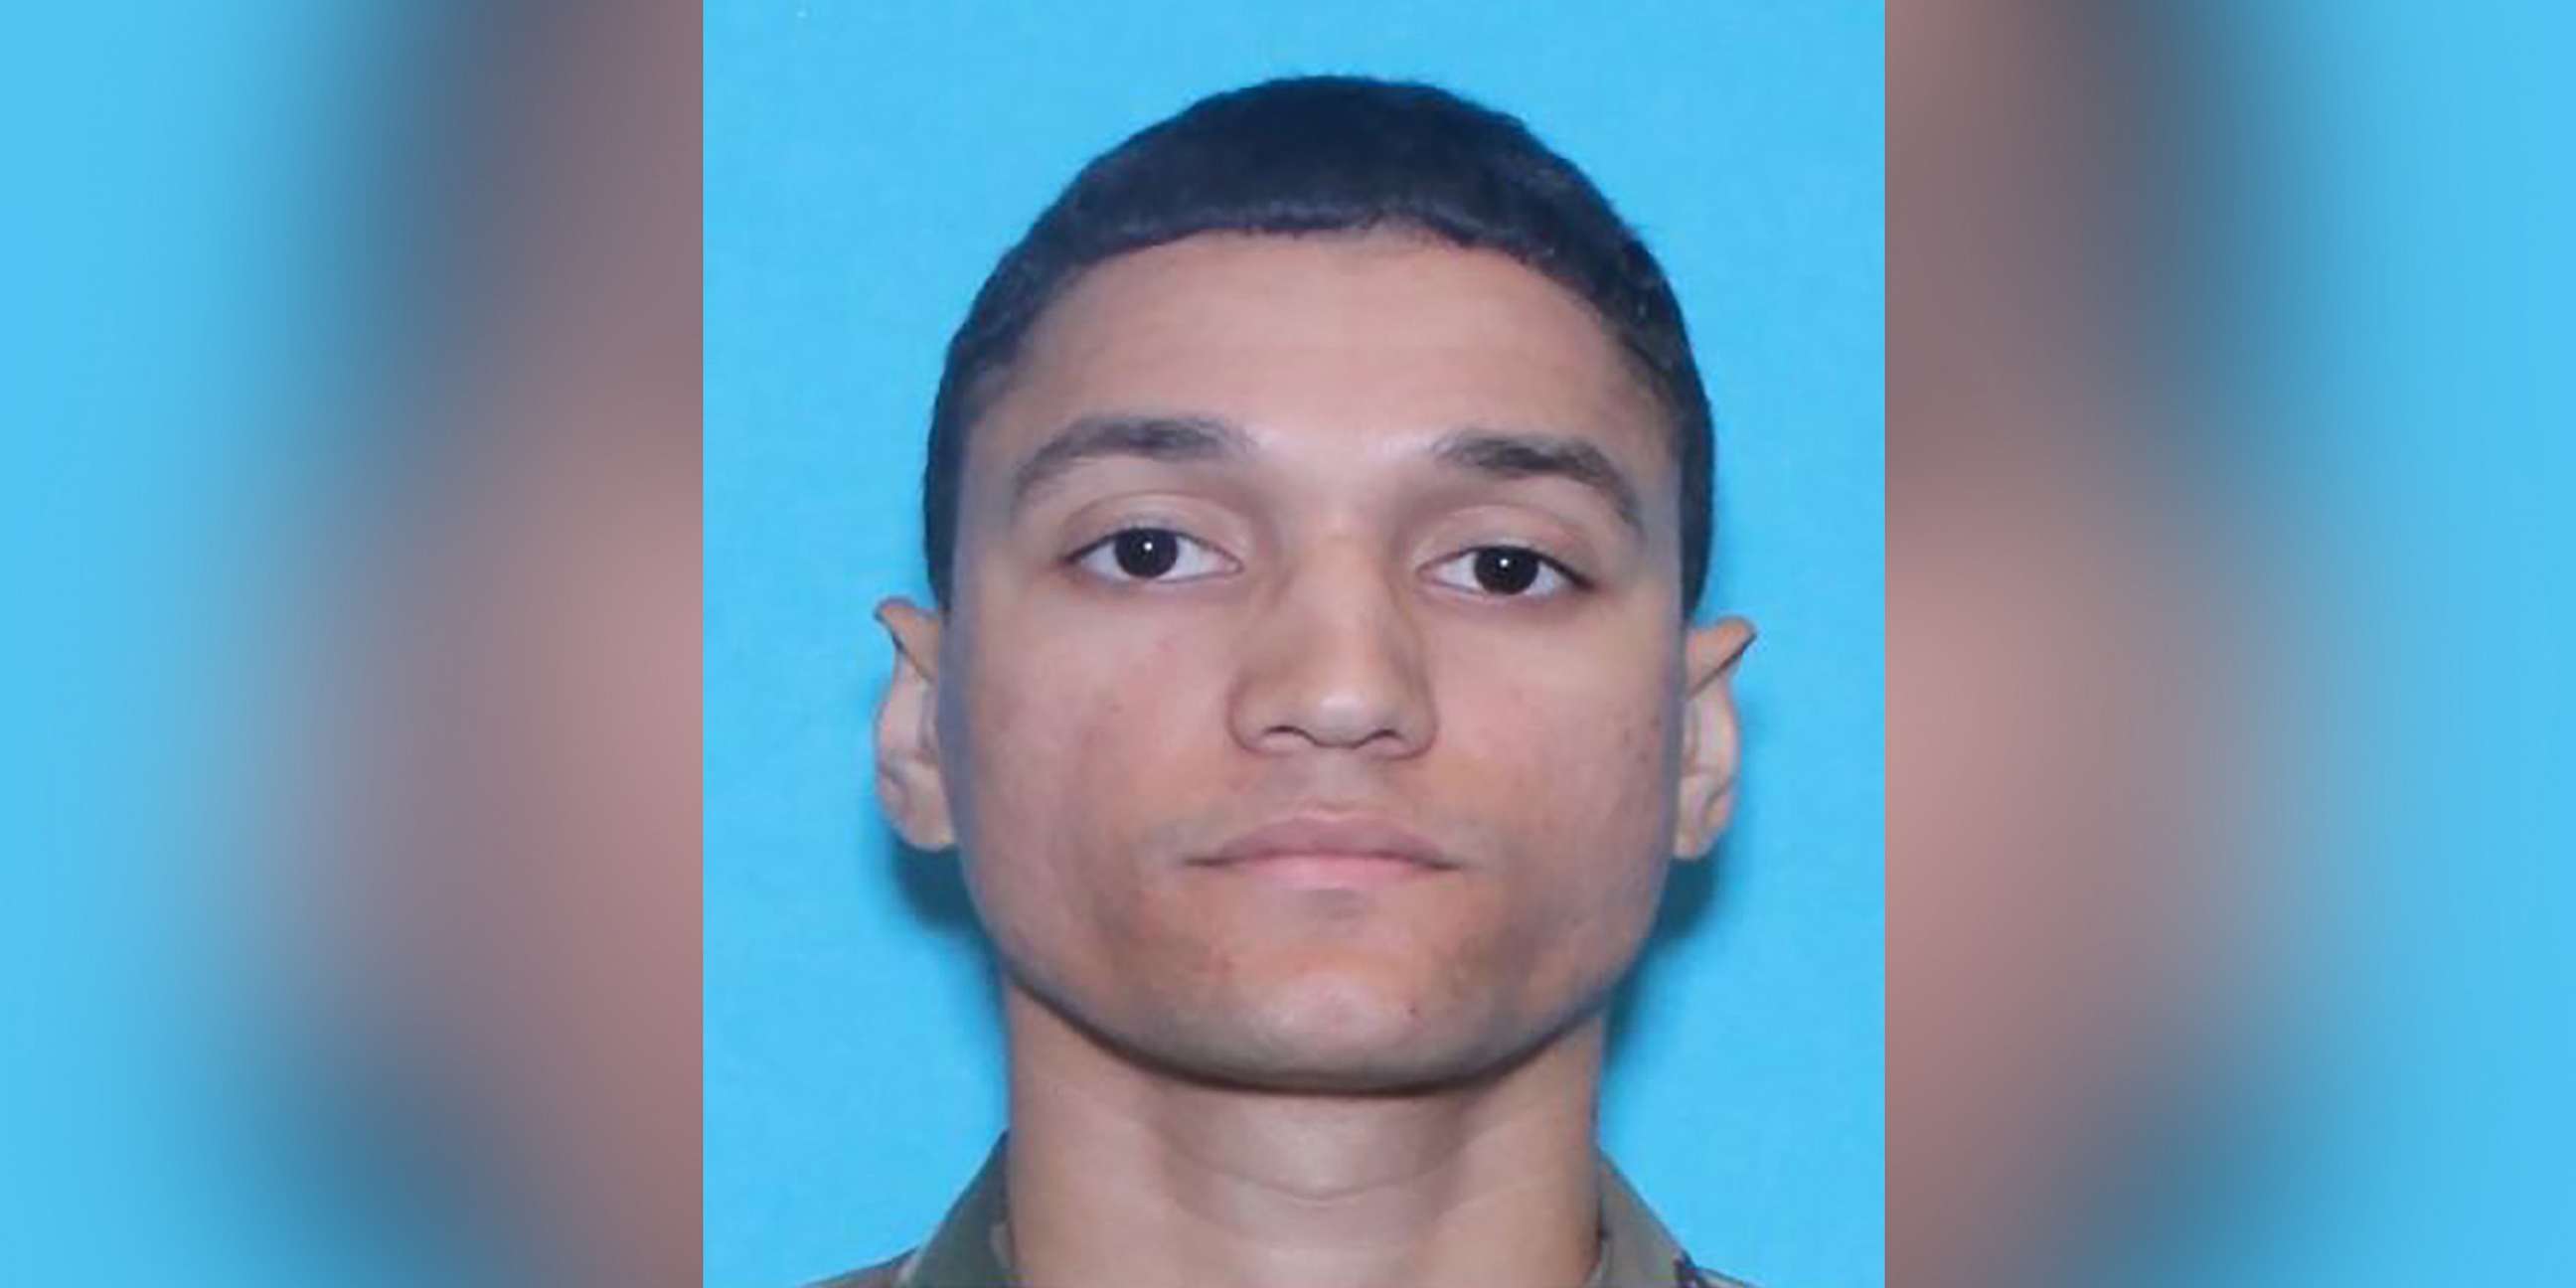 PHOTO: Sgt. Elder Fernandes, 23, is pictured in a photo released by the Killeen Police Department in Killeen, Texas, on Aug. 20, 2020. He was reported missing by his family, who have not heard from him since Aug. 17.